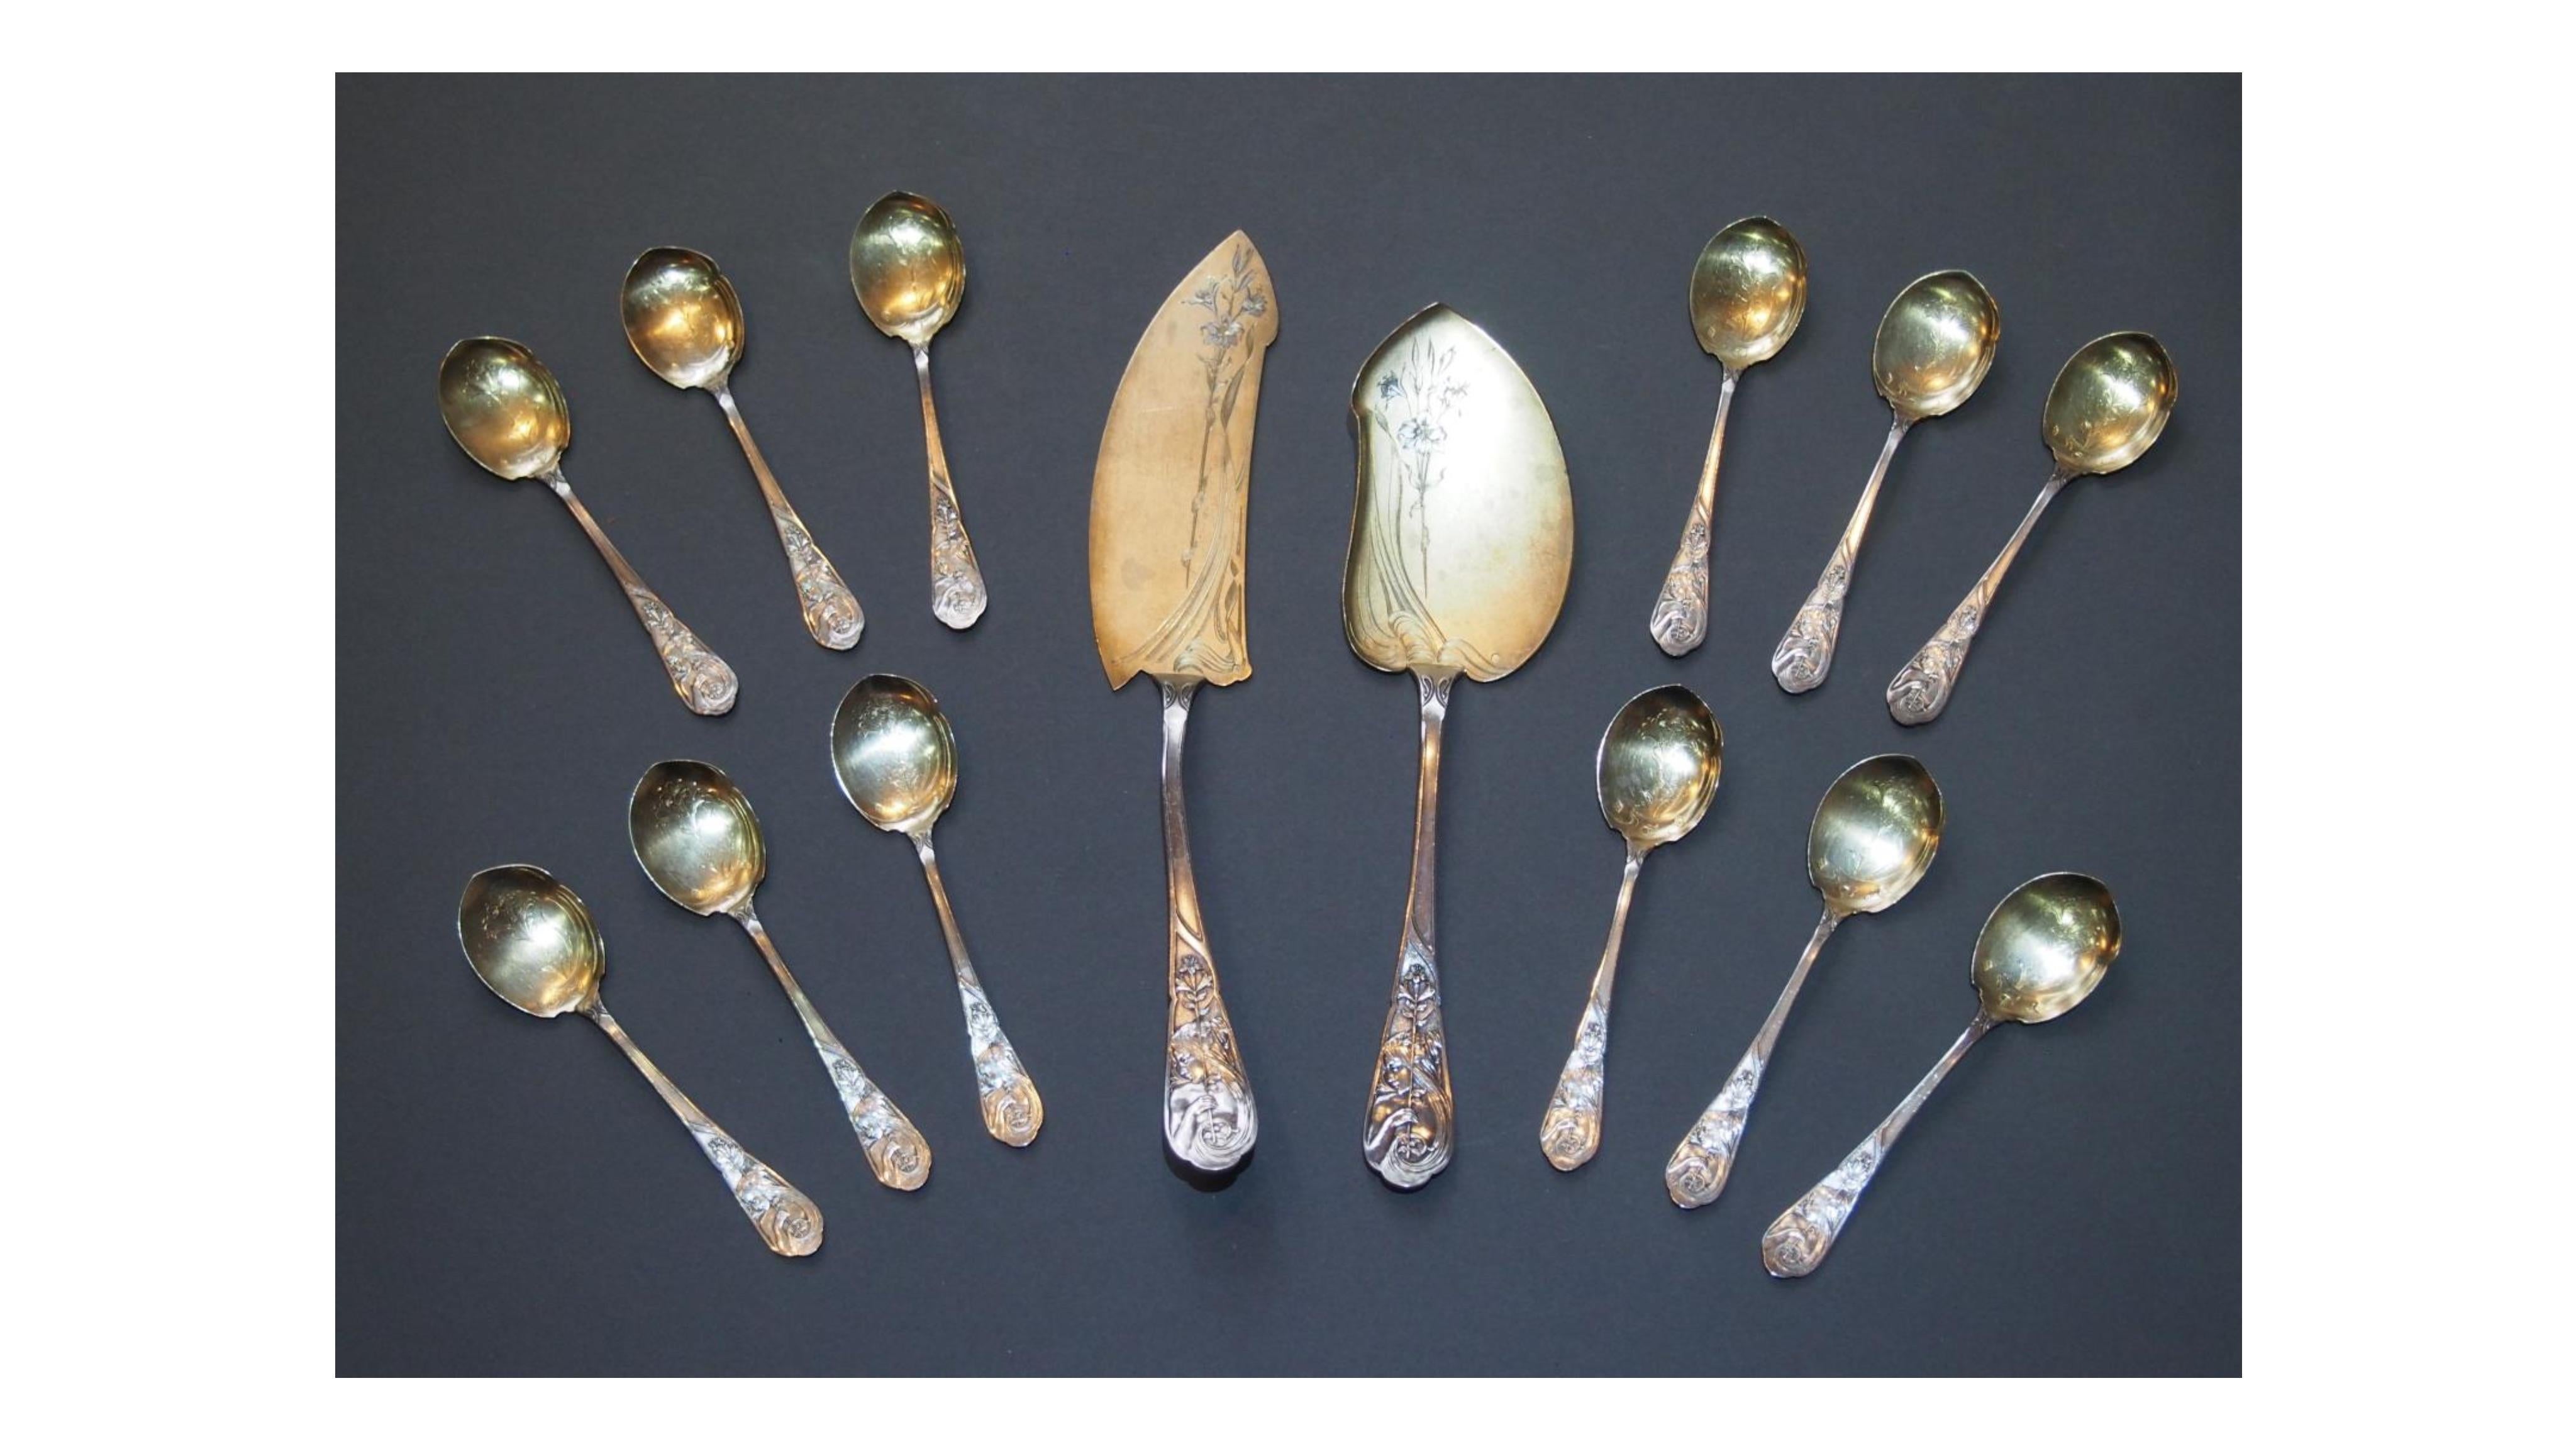 Art Nouveau silver and vermeil ice cream set 950, with twelve spoons and a chiseled cutlery of a young woman with a lily.
Weight: 445 g.